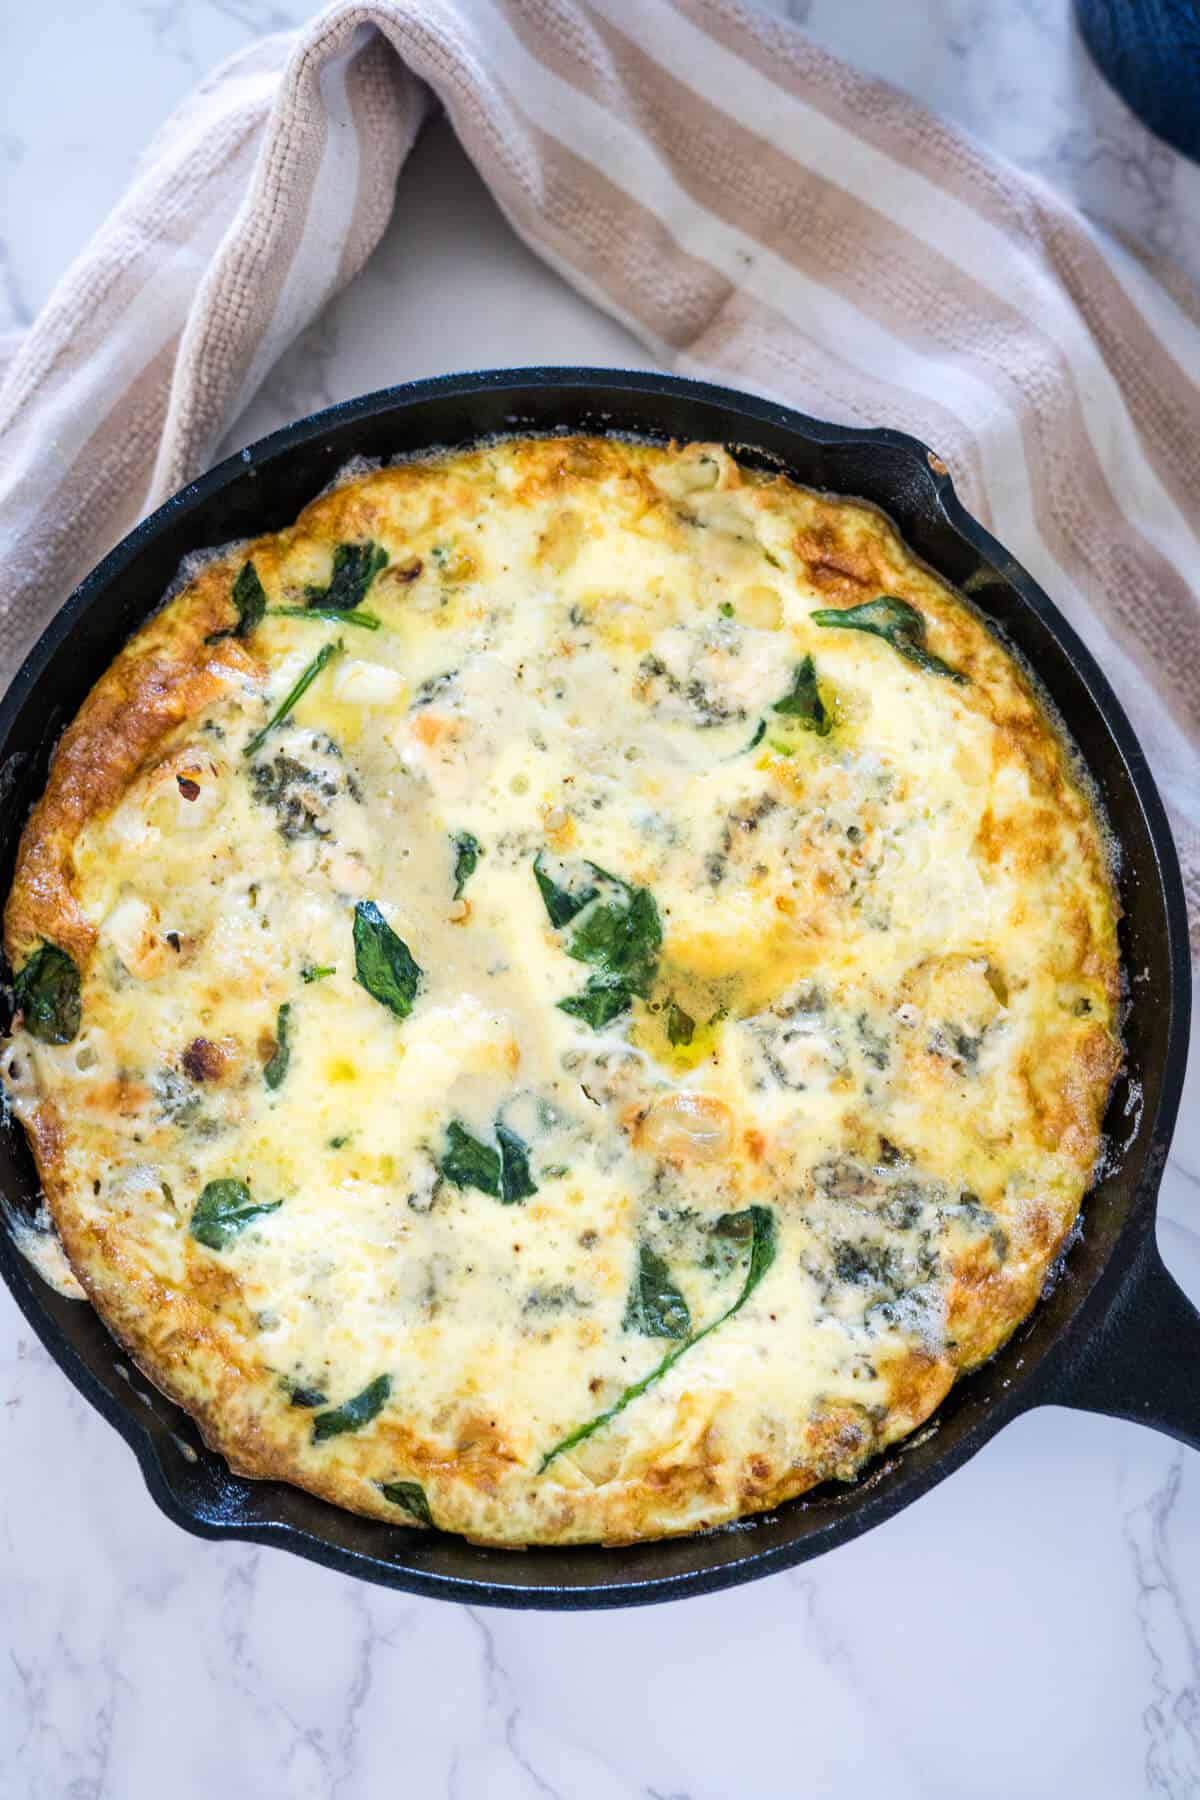 A skillet filled with a frittata.